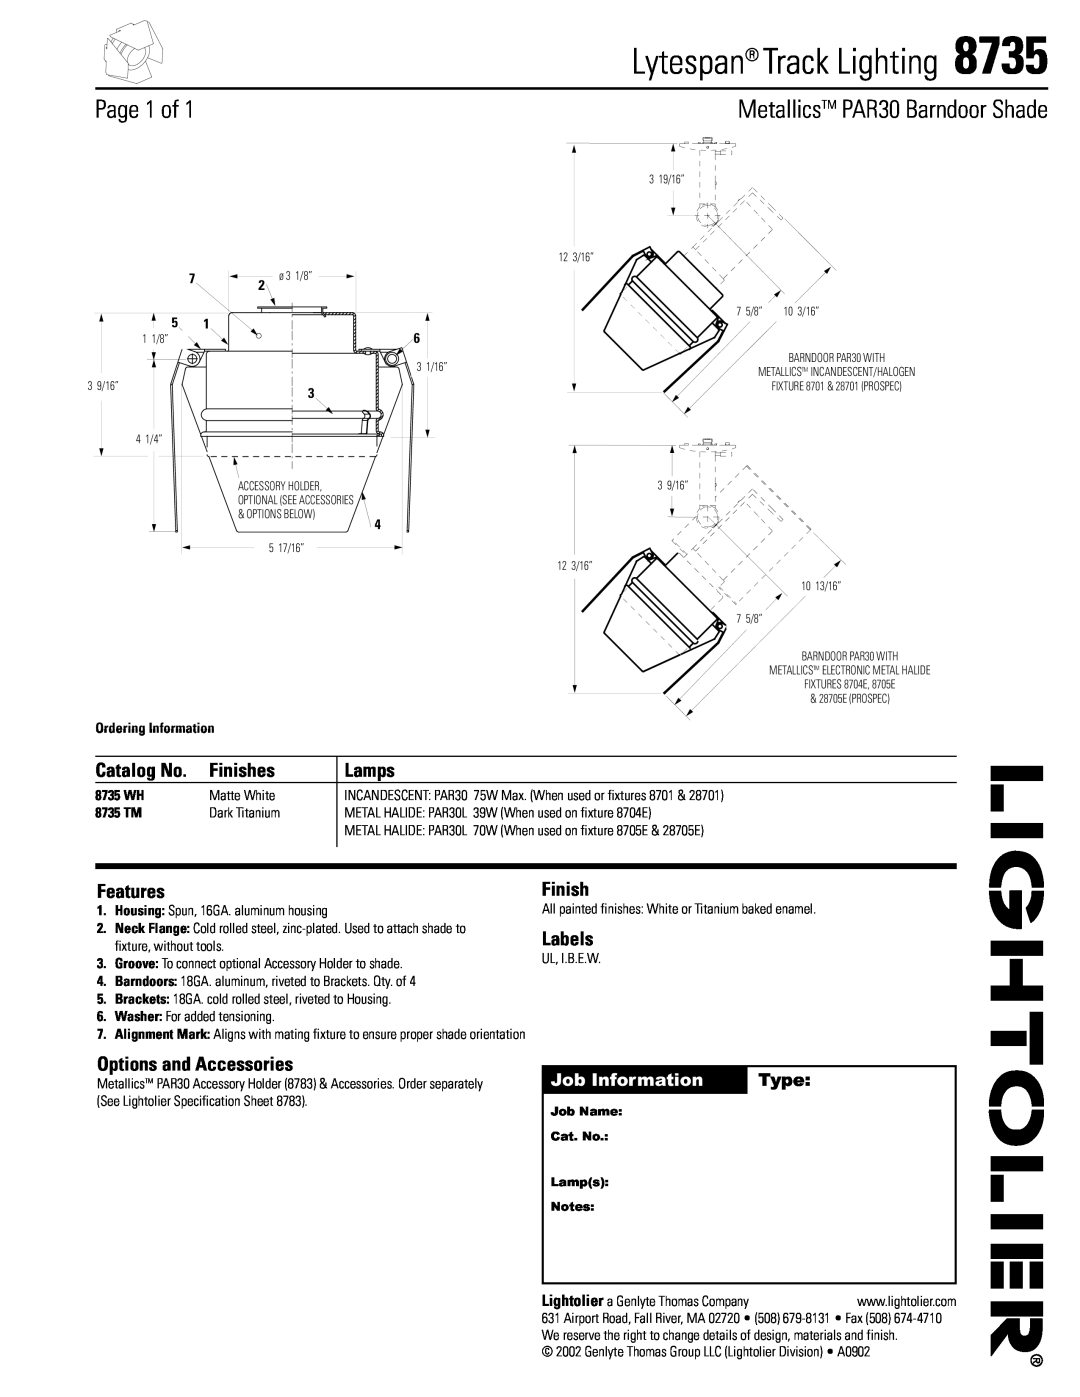 Lightolier 8735 specifications Lytespan Track Lighting, Page 1 of, MetallicsTM PAR30 Barndoor Shade, Lamps, Features, Type 